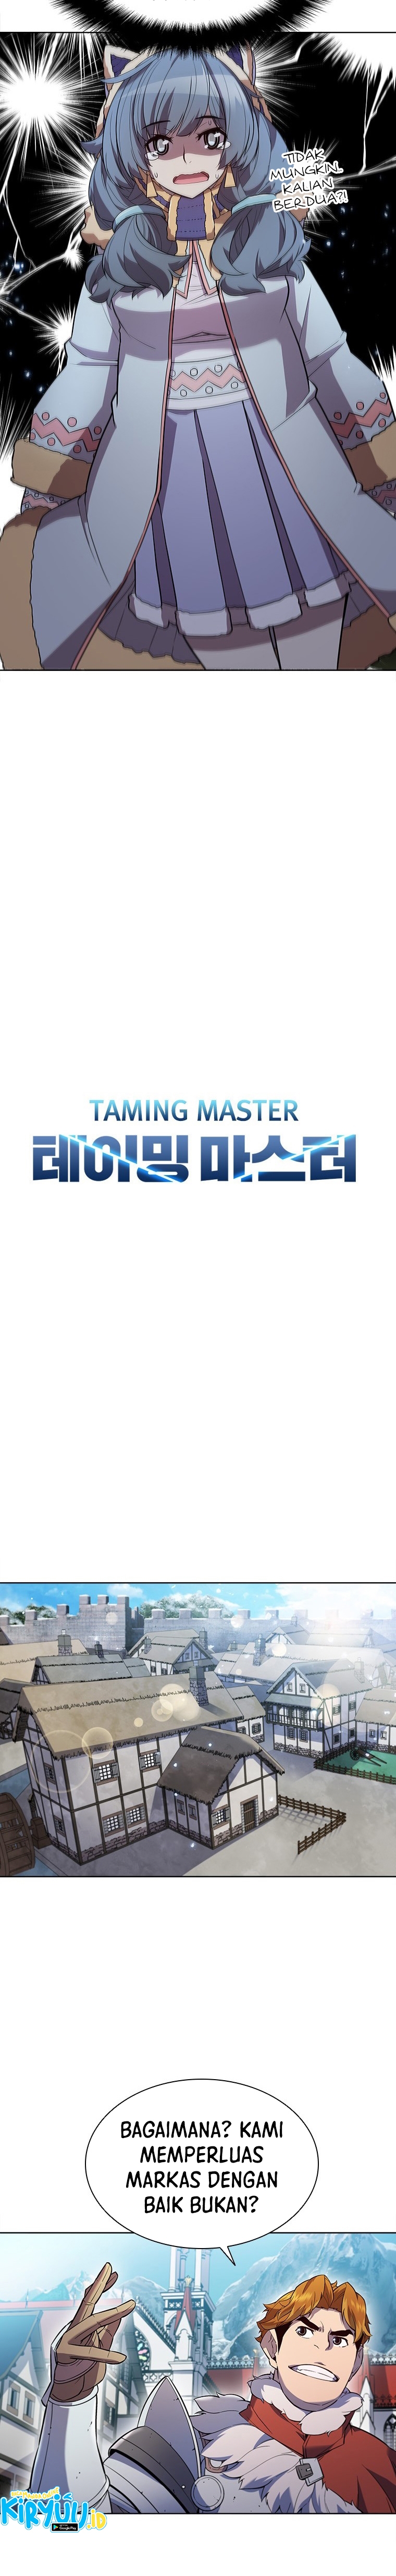 The Taming Master Chapter 58 - 185